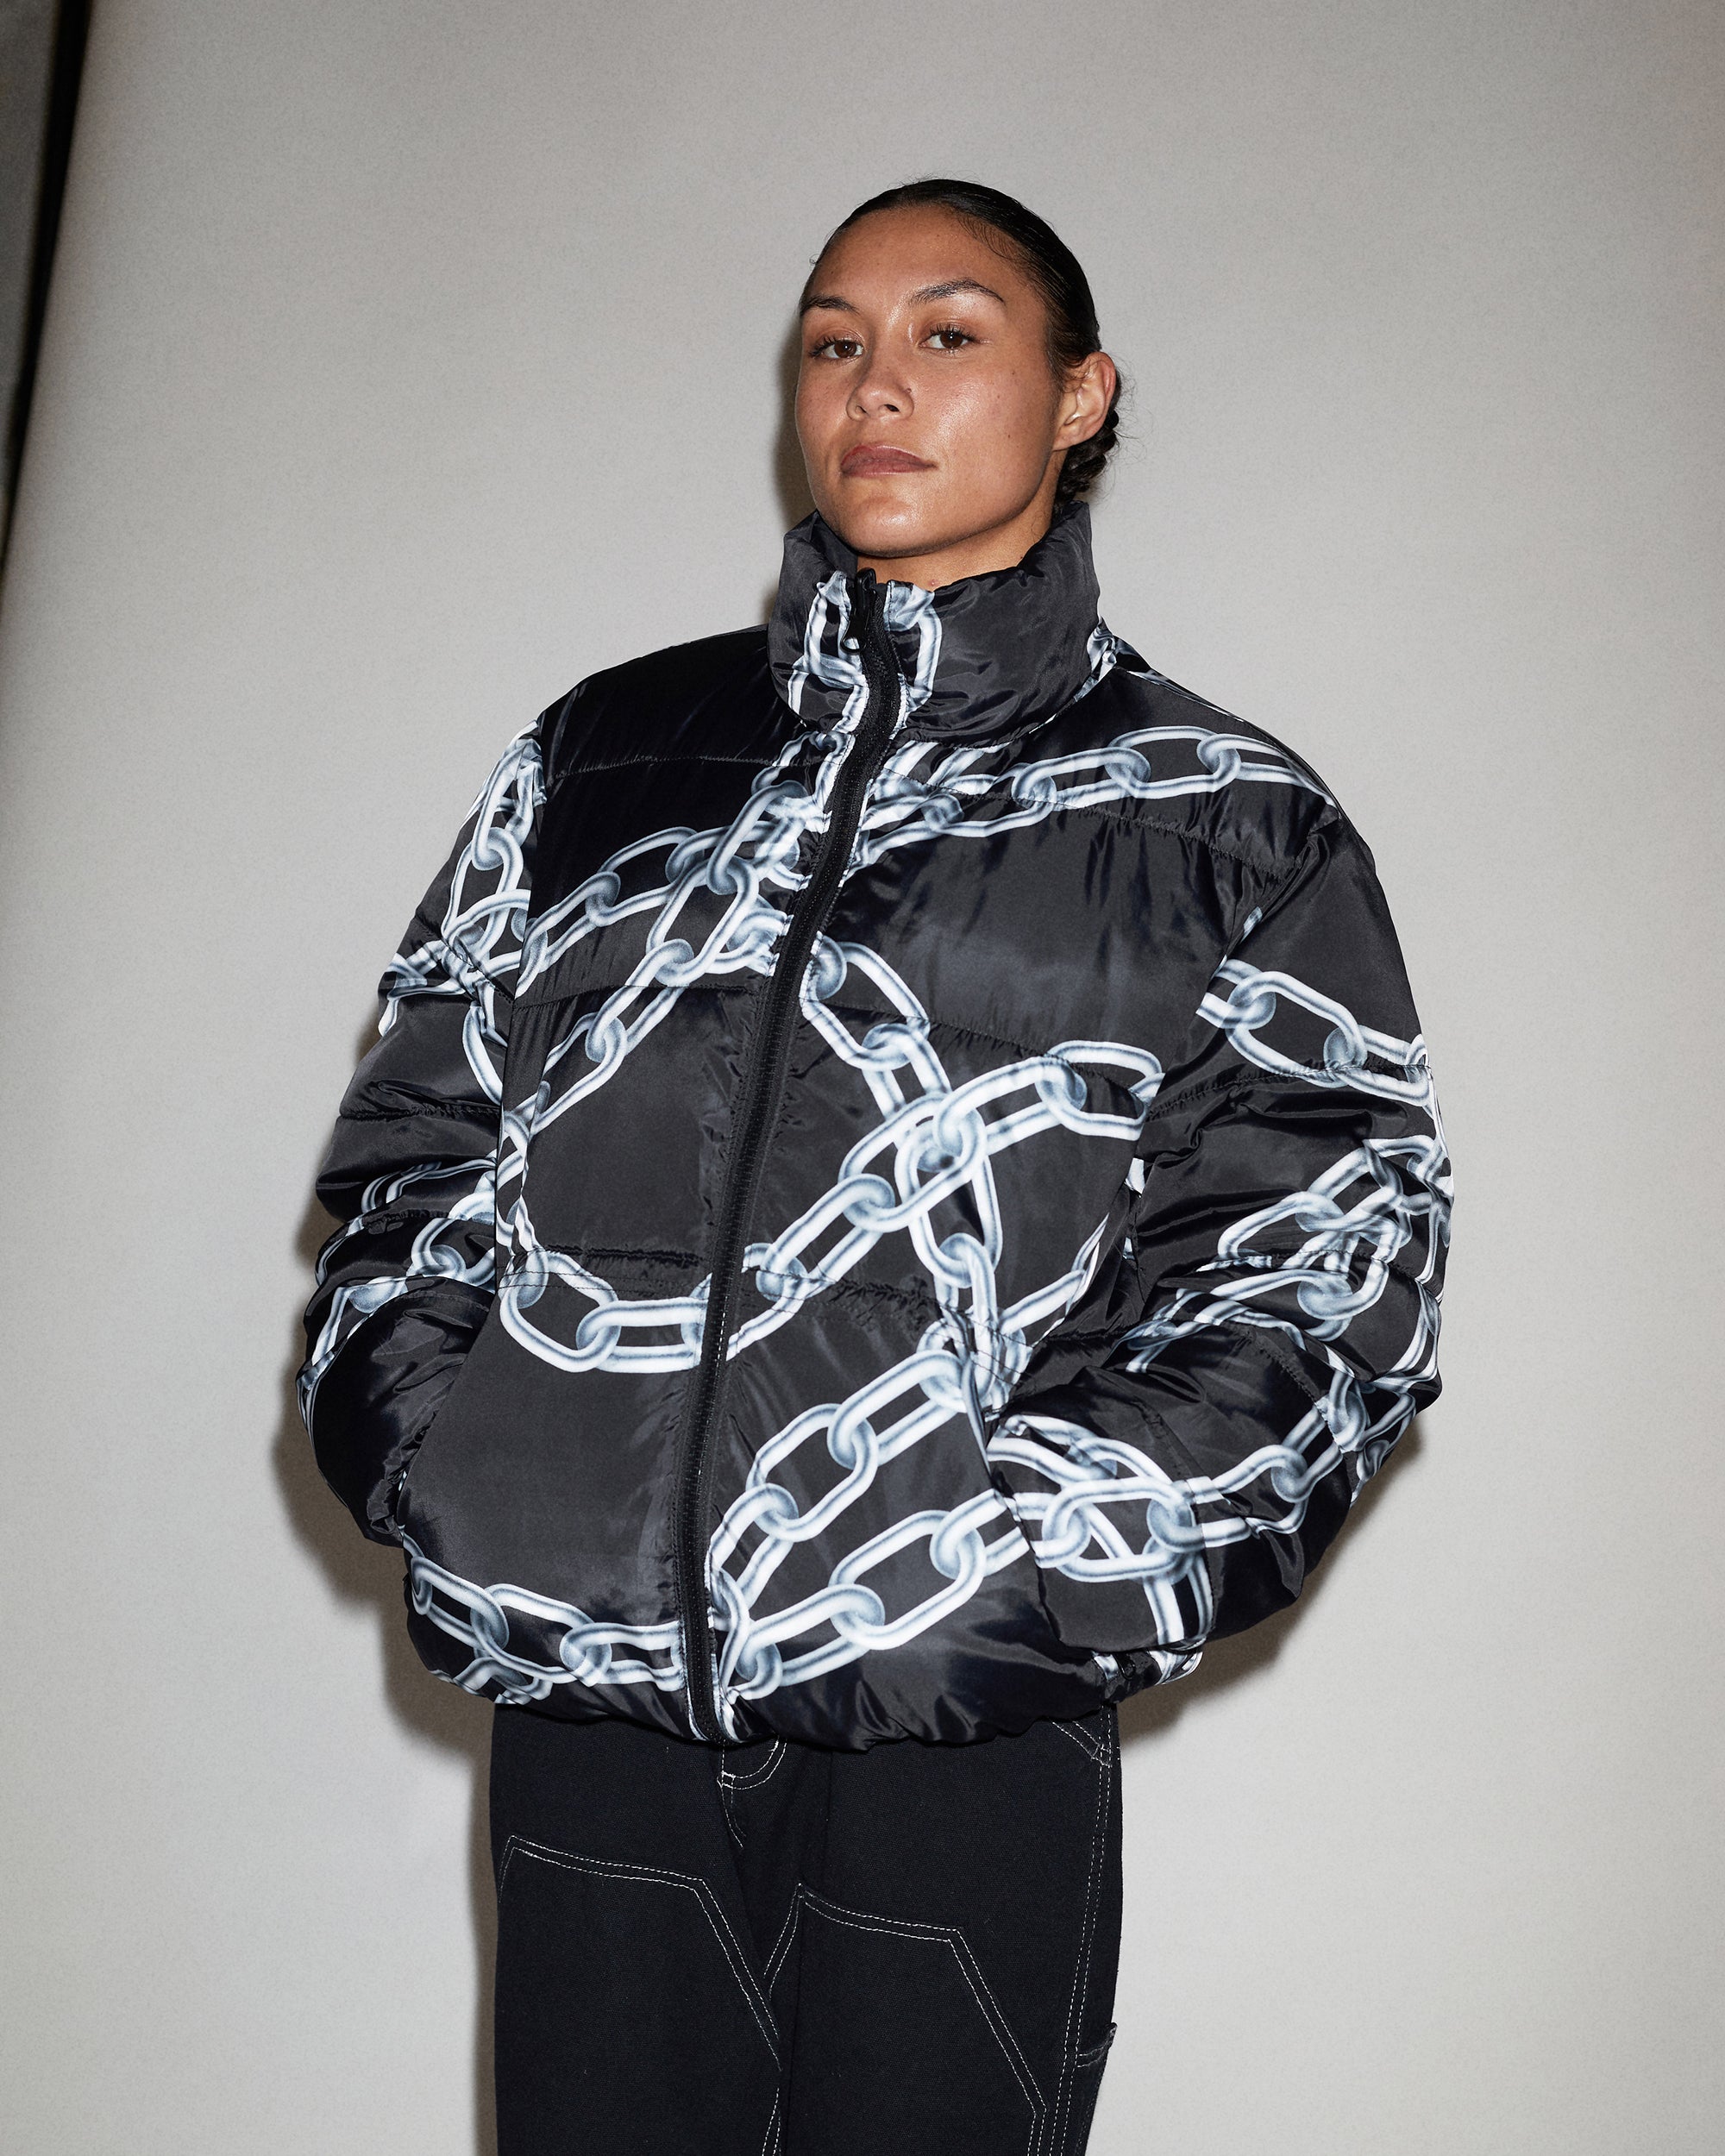 Reversible Chains Puffer Jacket